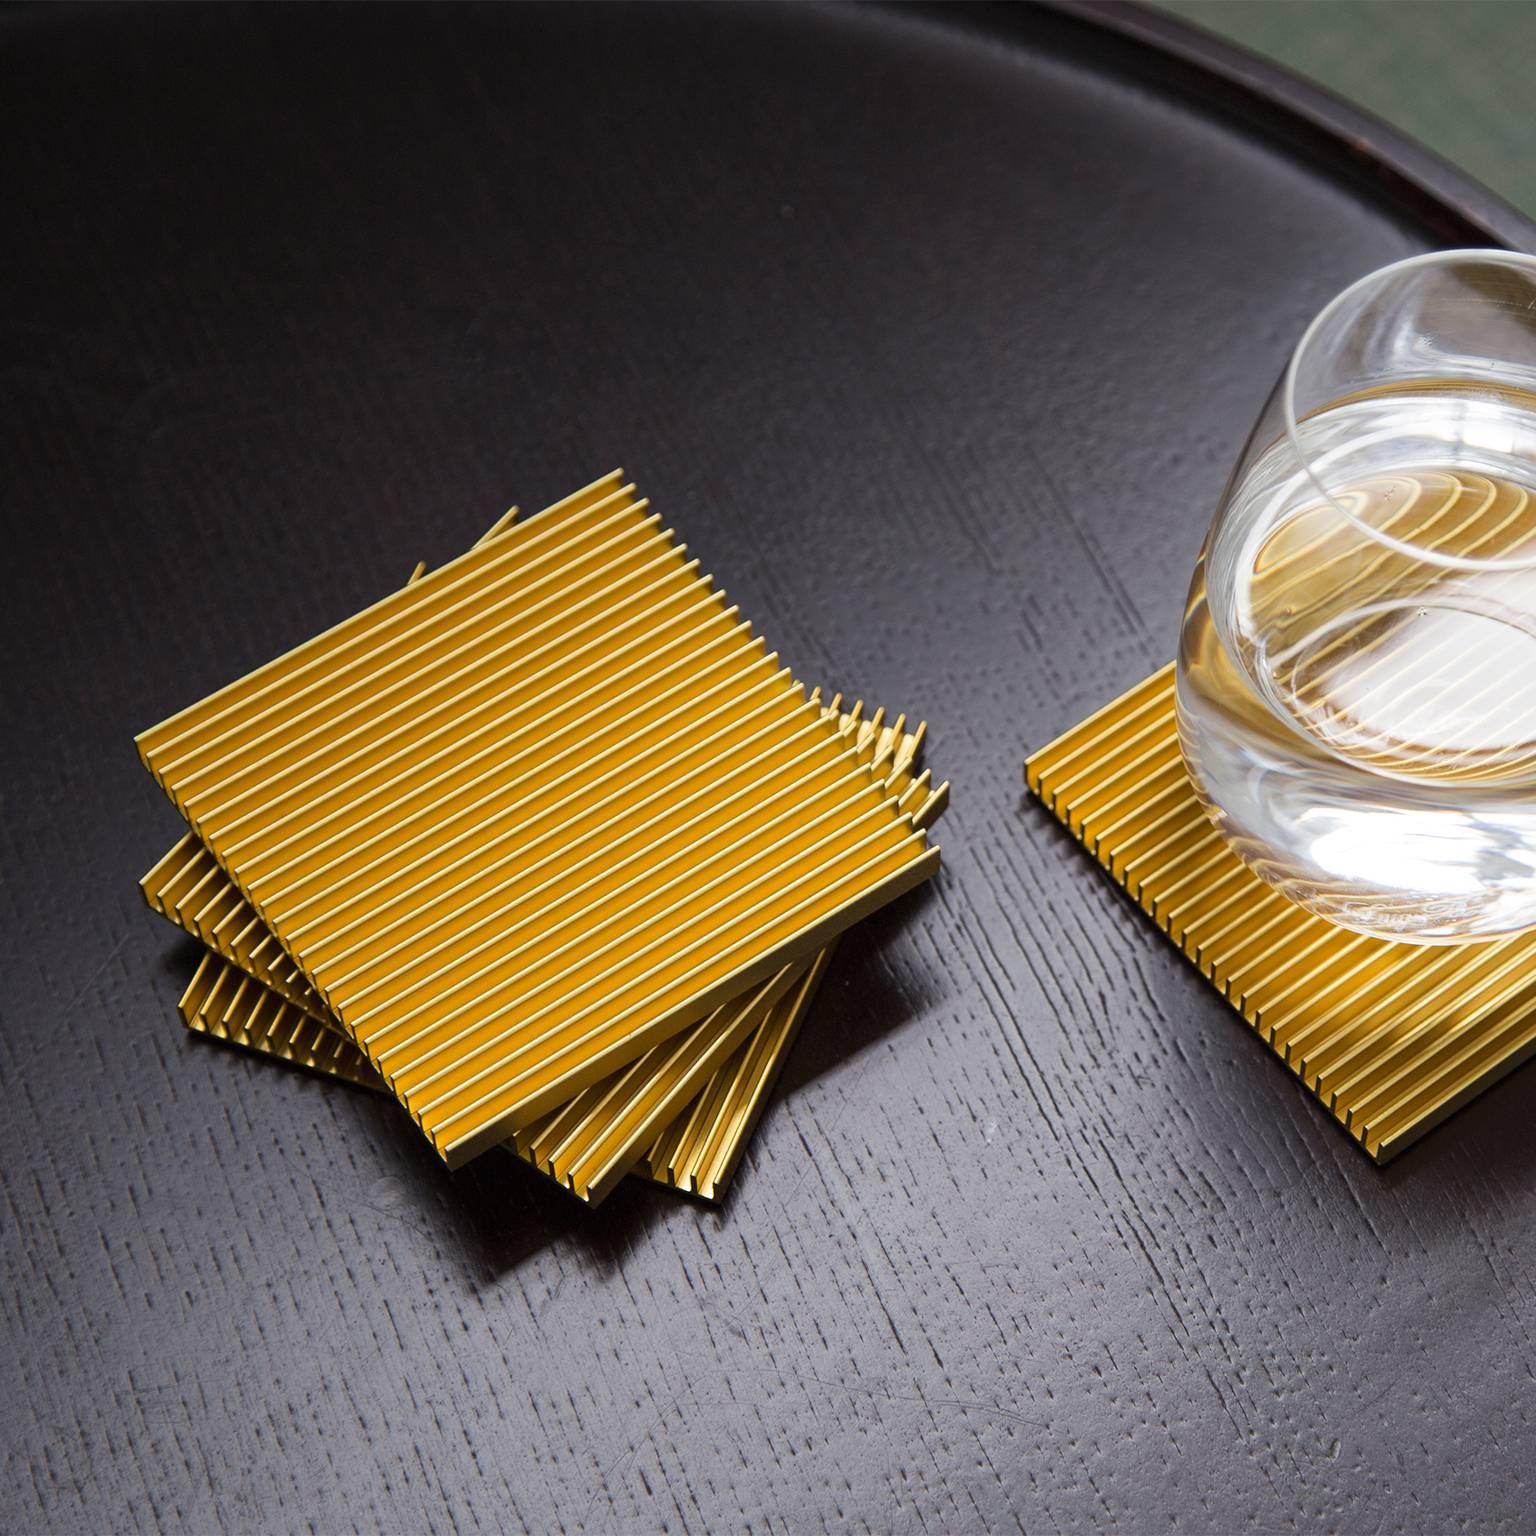 Anodized Fin Coasters from Souda, In Stock, Set of Four, Gold, Modern, Minimal